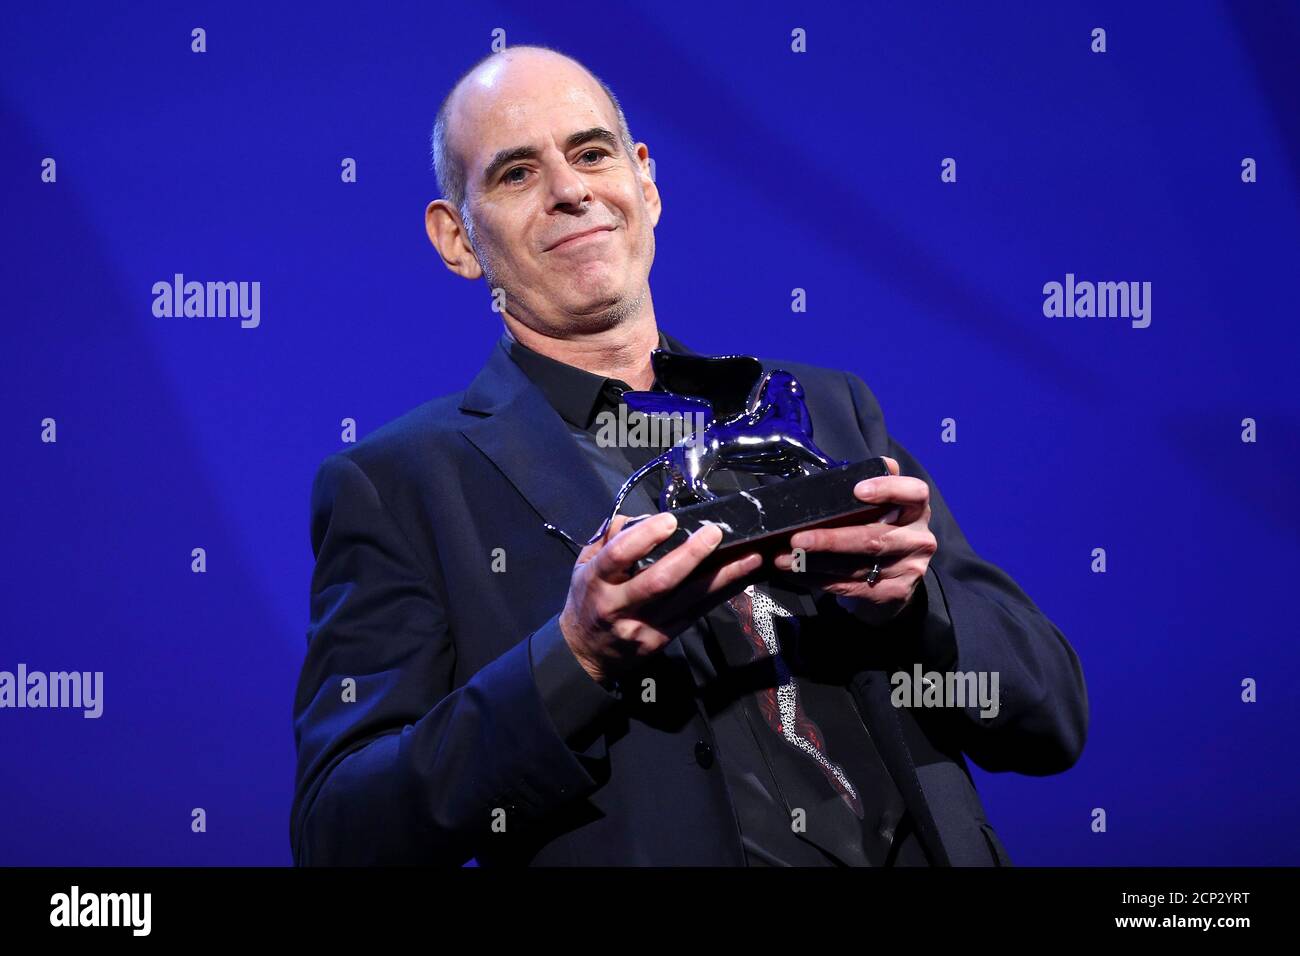 Samuel Maoz holds the Grand Jury Prize award for the movie 'Foxtrot' during the awards ceremony at the 74th Venice Film Festival in Venice, Italy September 9, 2017. REUTERS/Alessandro Bianchi Stock Photo